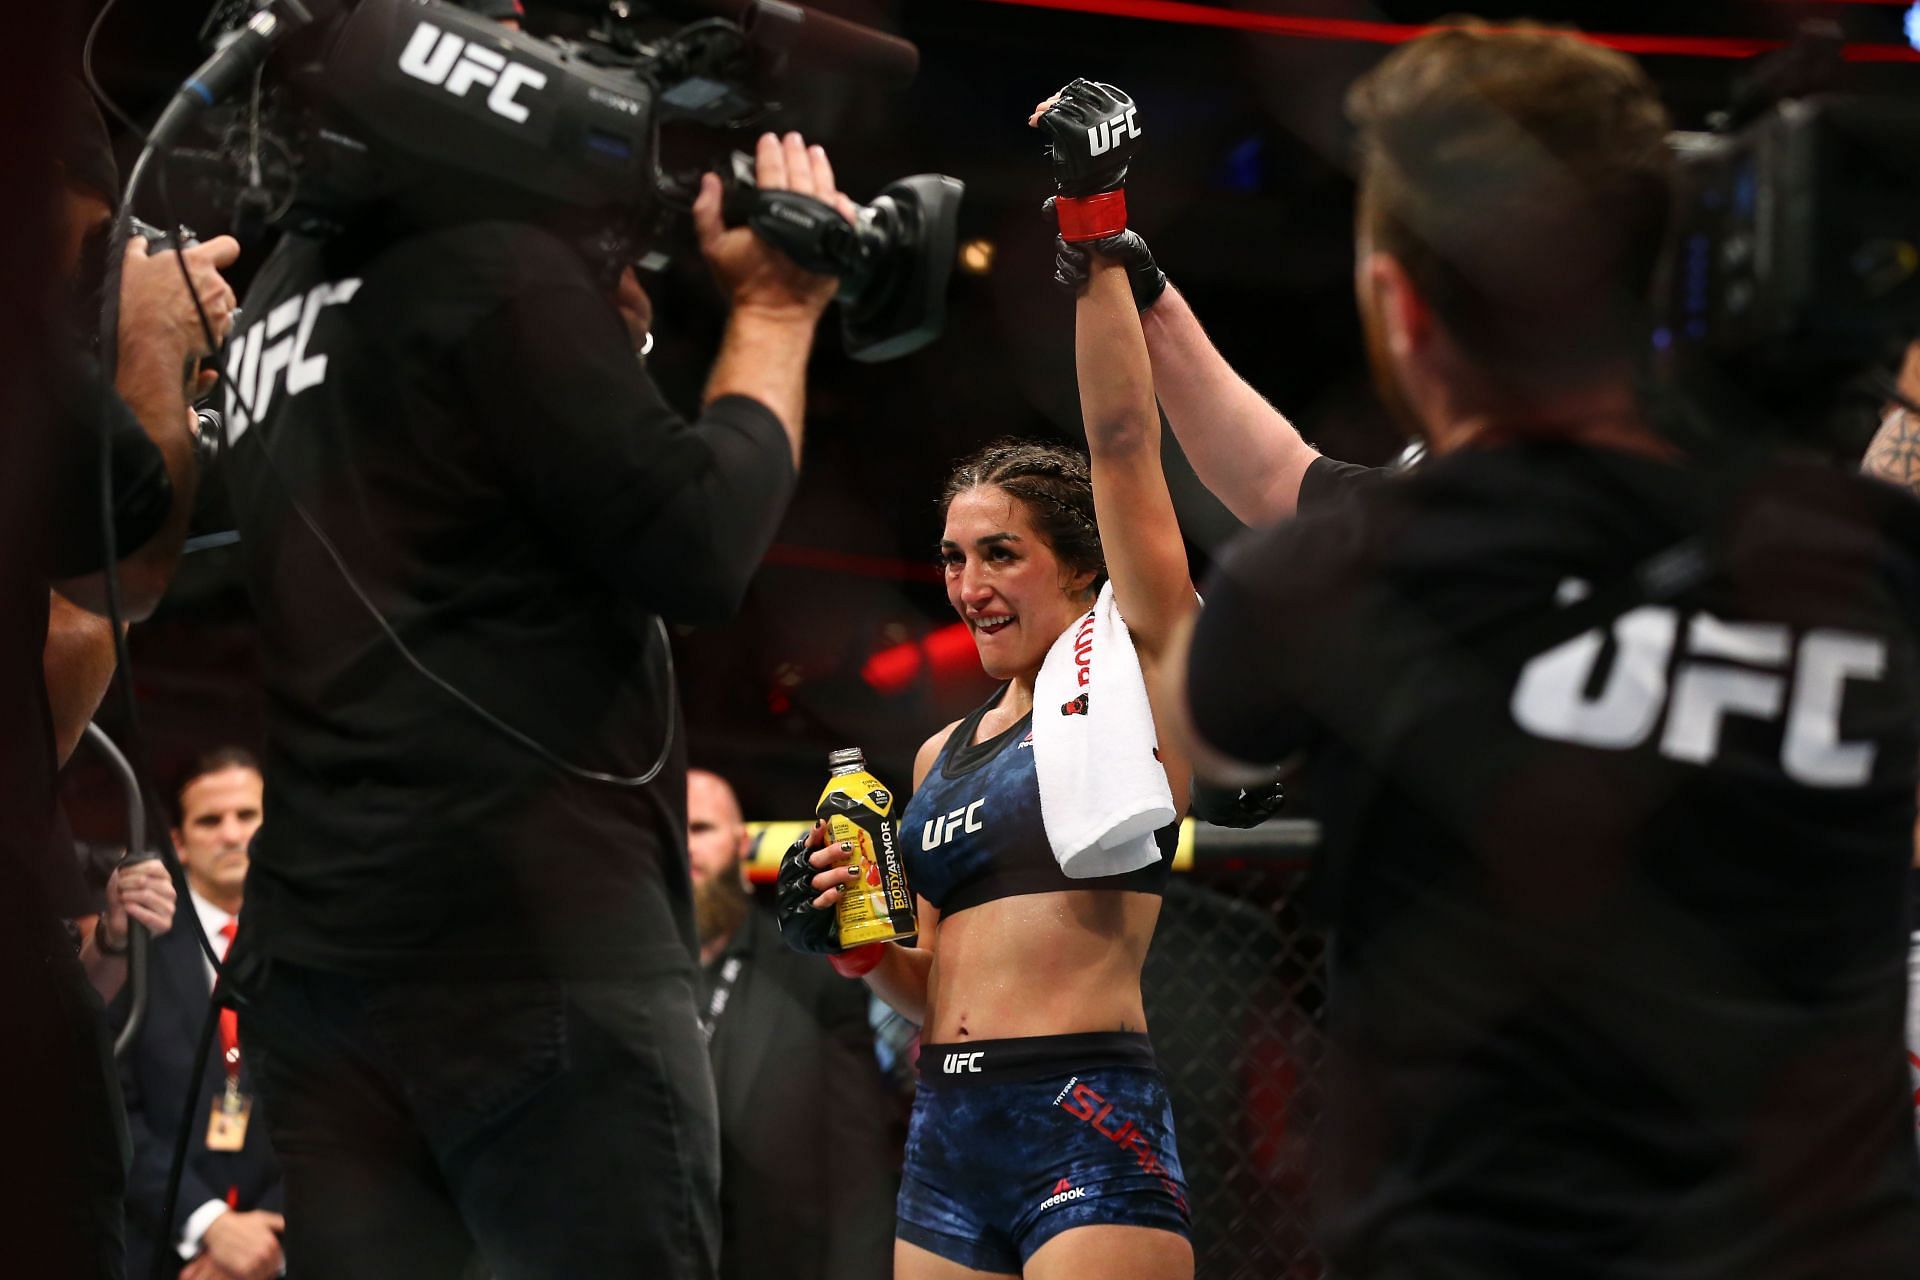 Tatiana Suarez impressed in her return to action after four years